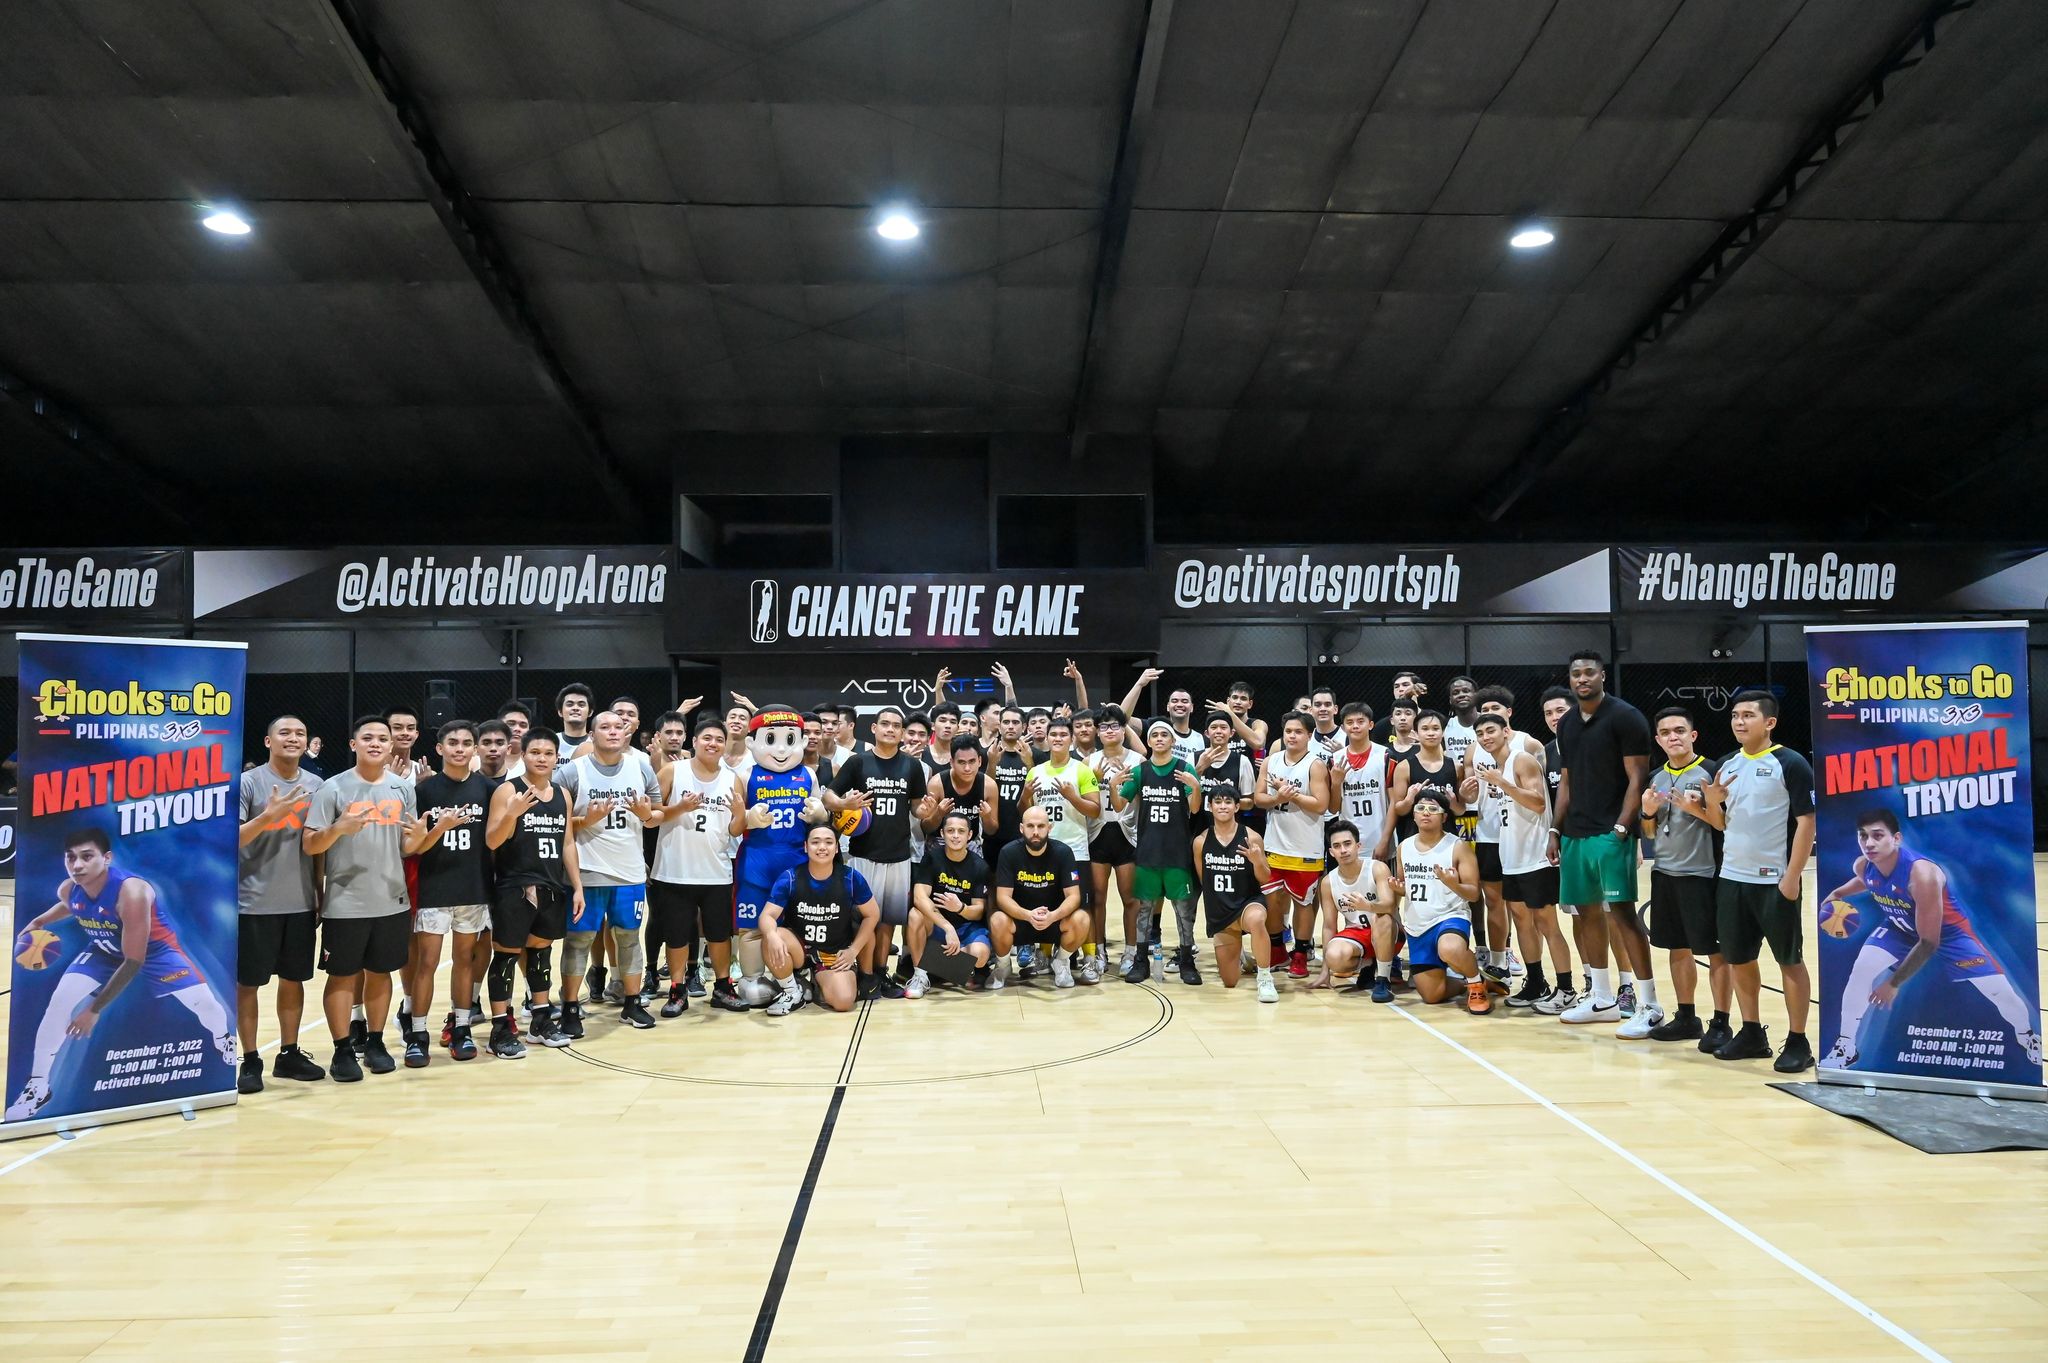 56-players-attended-the-Chooks-to-Go-Pilipinas-National-tryouts-for-guards-2 Chooks 3x3 taps Liman's head trainer as consultant 3x3 Basketball Chooks-to-Go Pilipinas 3x3 News  - philippine sports news